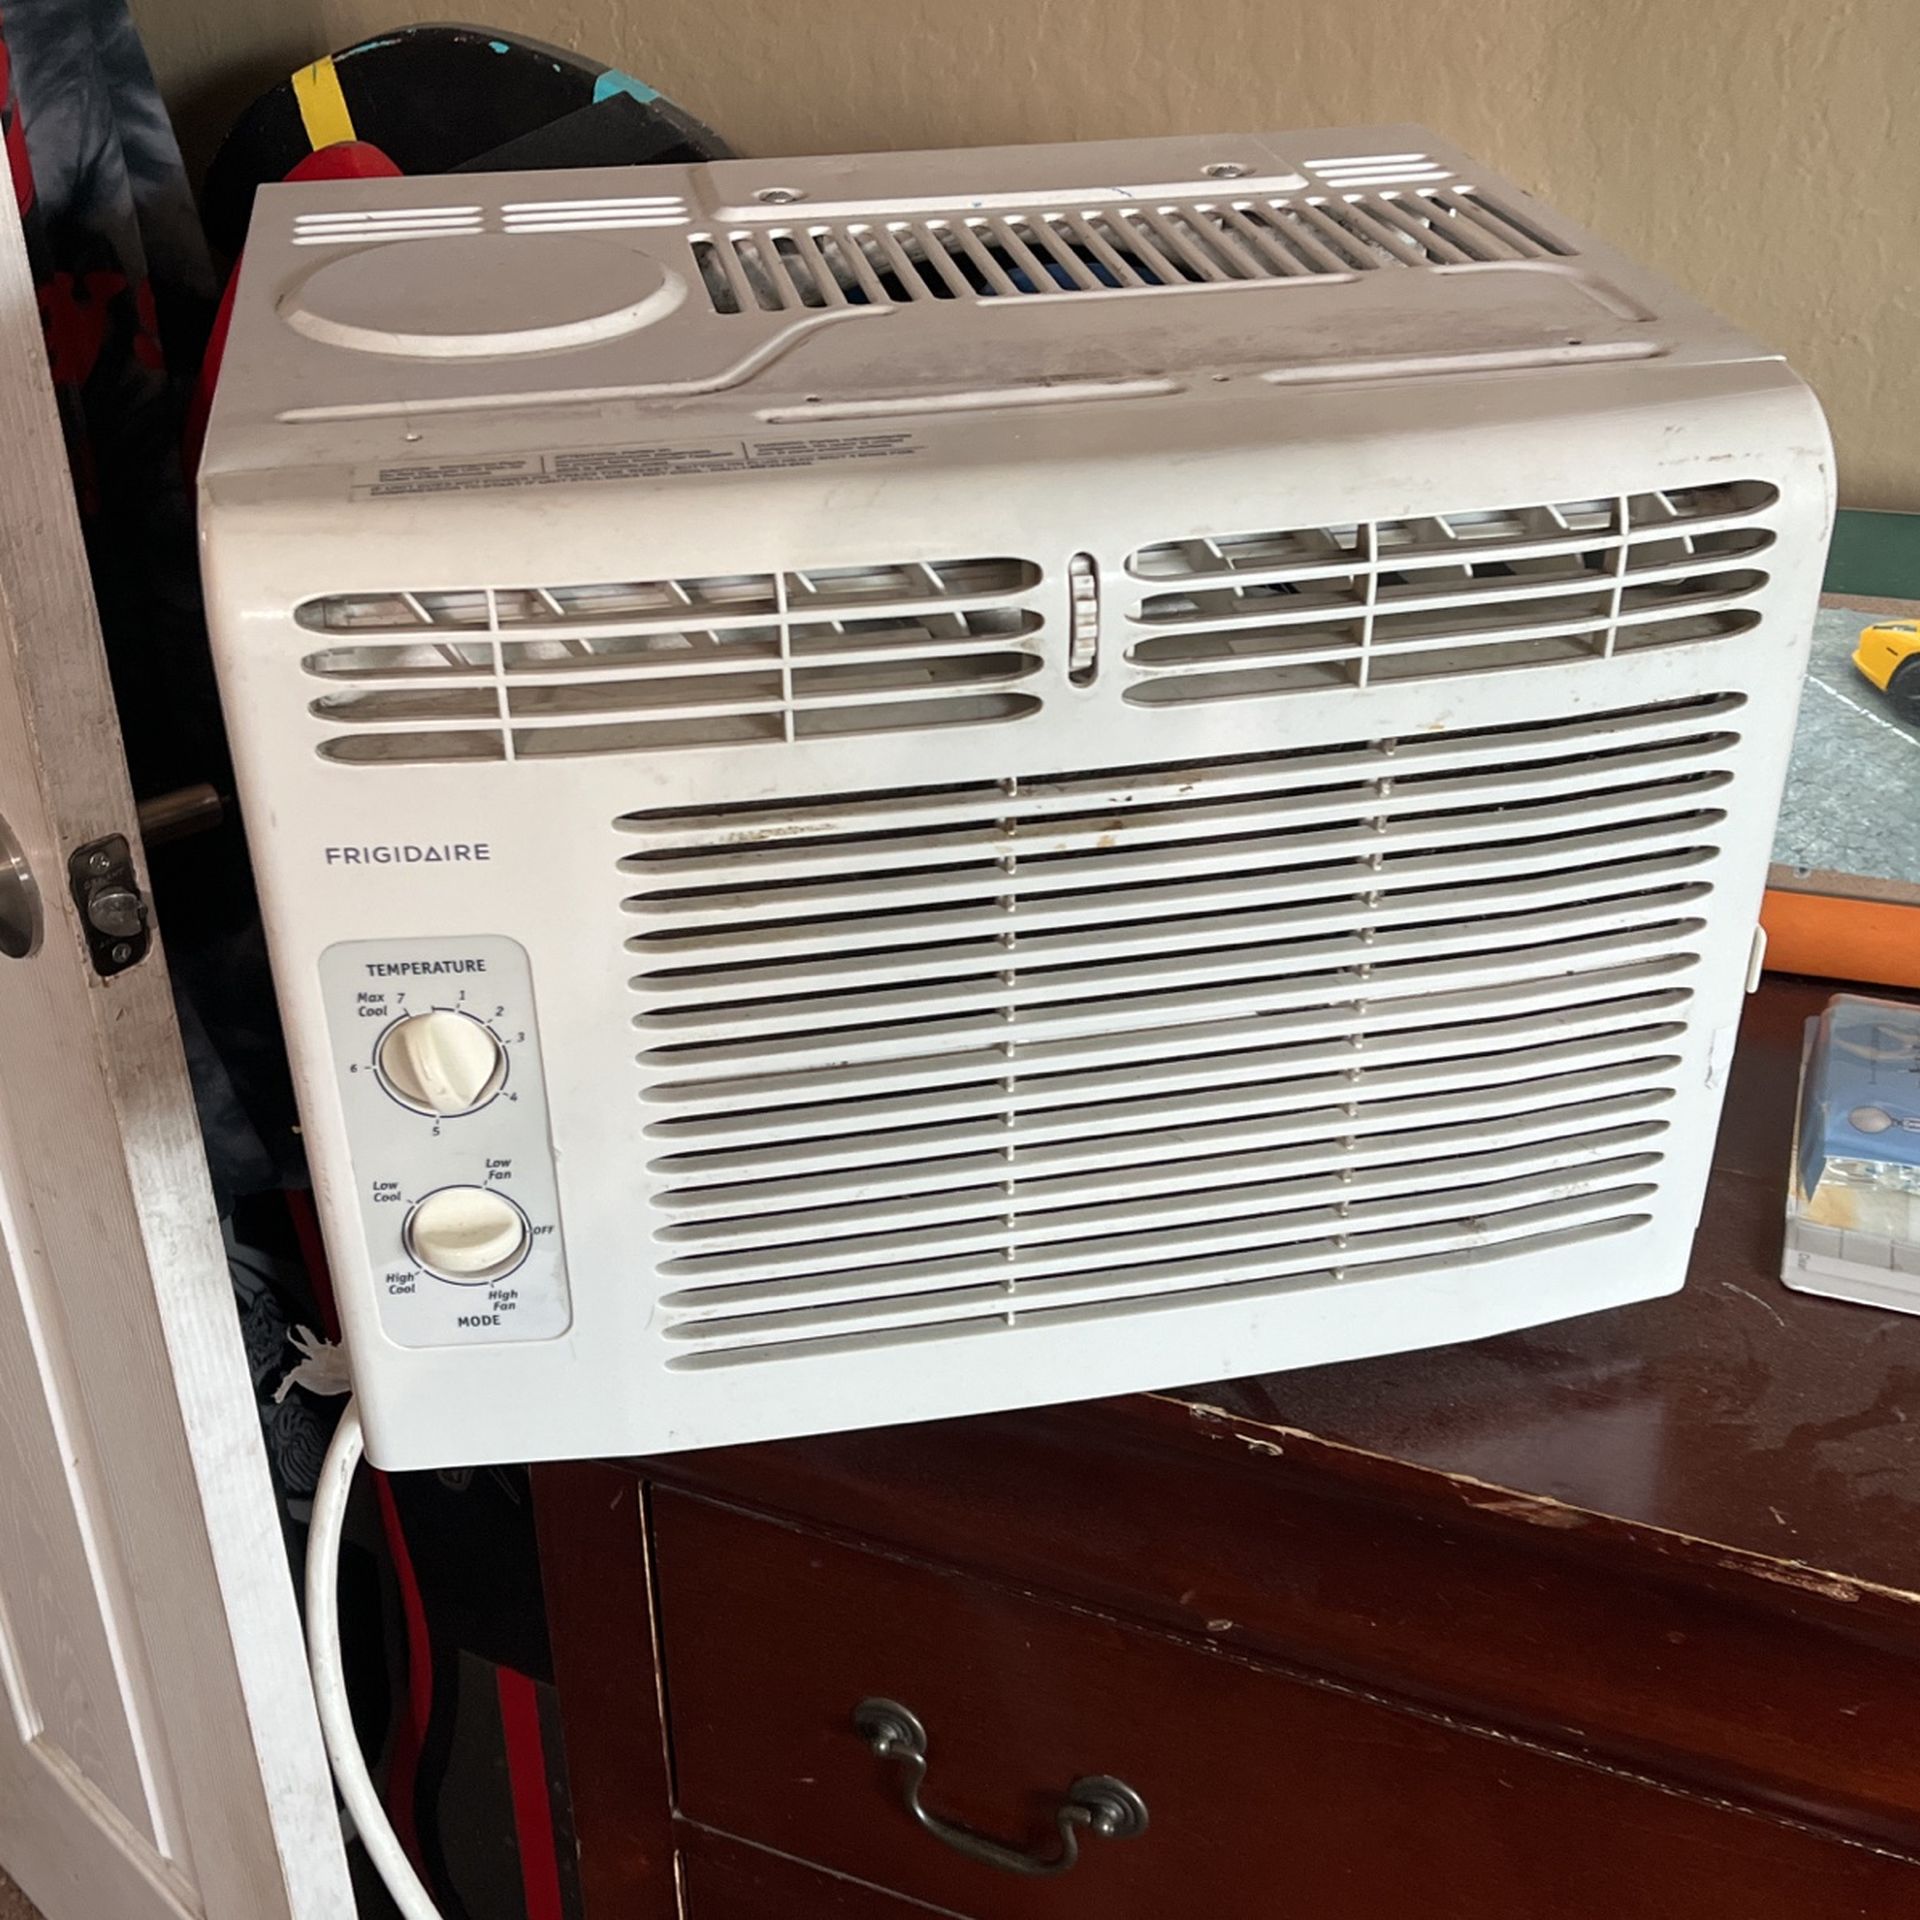 REDUCED! $50 Firm. Air Conditioner For Sale Used For Part Of One Season Only. It’s A Frigidaire Blows Very Cold Like New Condition.